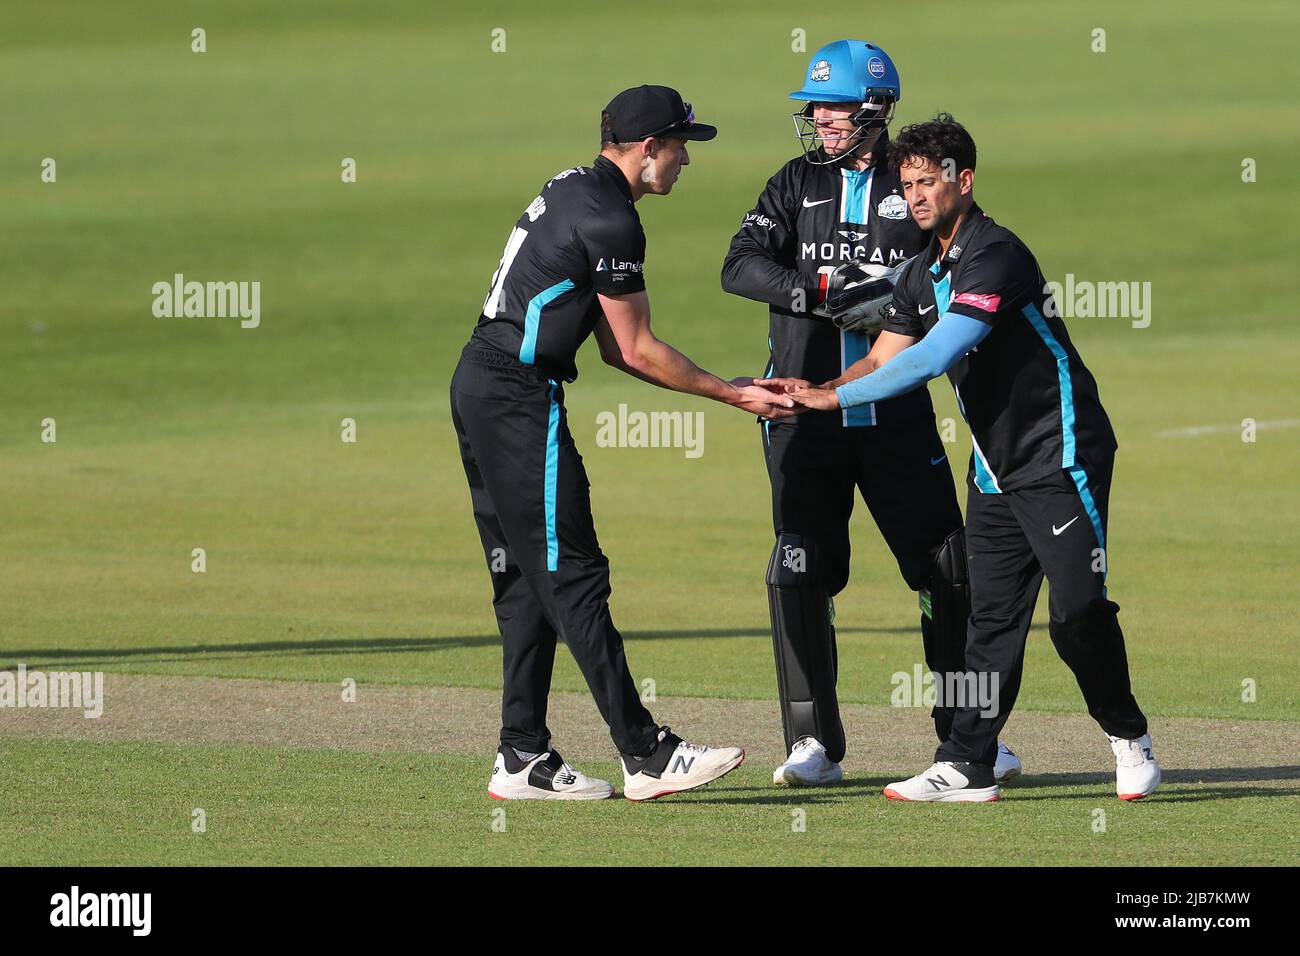 CHESTER LE STREET, UK. JUN 1st Worcester Rapids Brett D'Oliveira (r) celebrates with Charlie Morris (L) and Ben Cox during the Vitality T20 Blast match between Durham County Cricket Club and Worcestershire at the Seat Unique Riverside, Chester le Street on Wednesday 1st June 2022. (Credit: Mark Fletcher | MI News) Credit: MI News & Sport /Alamy Live News Stock Photo